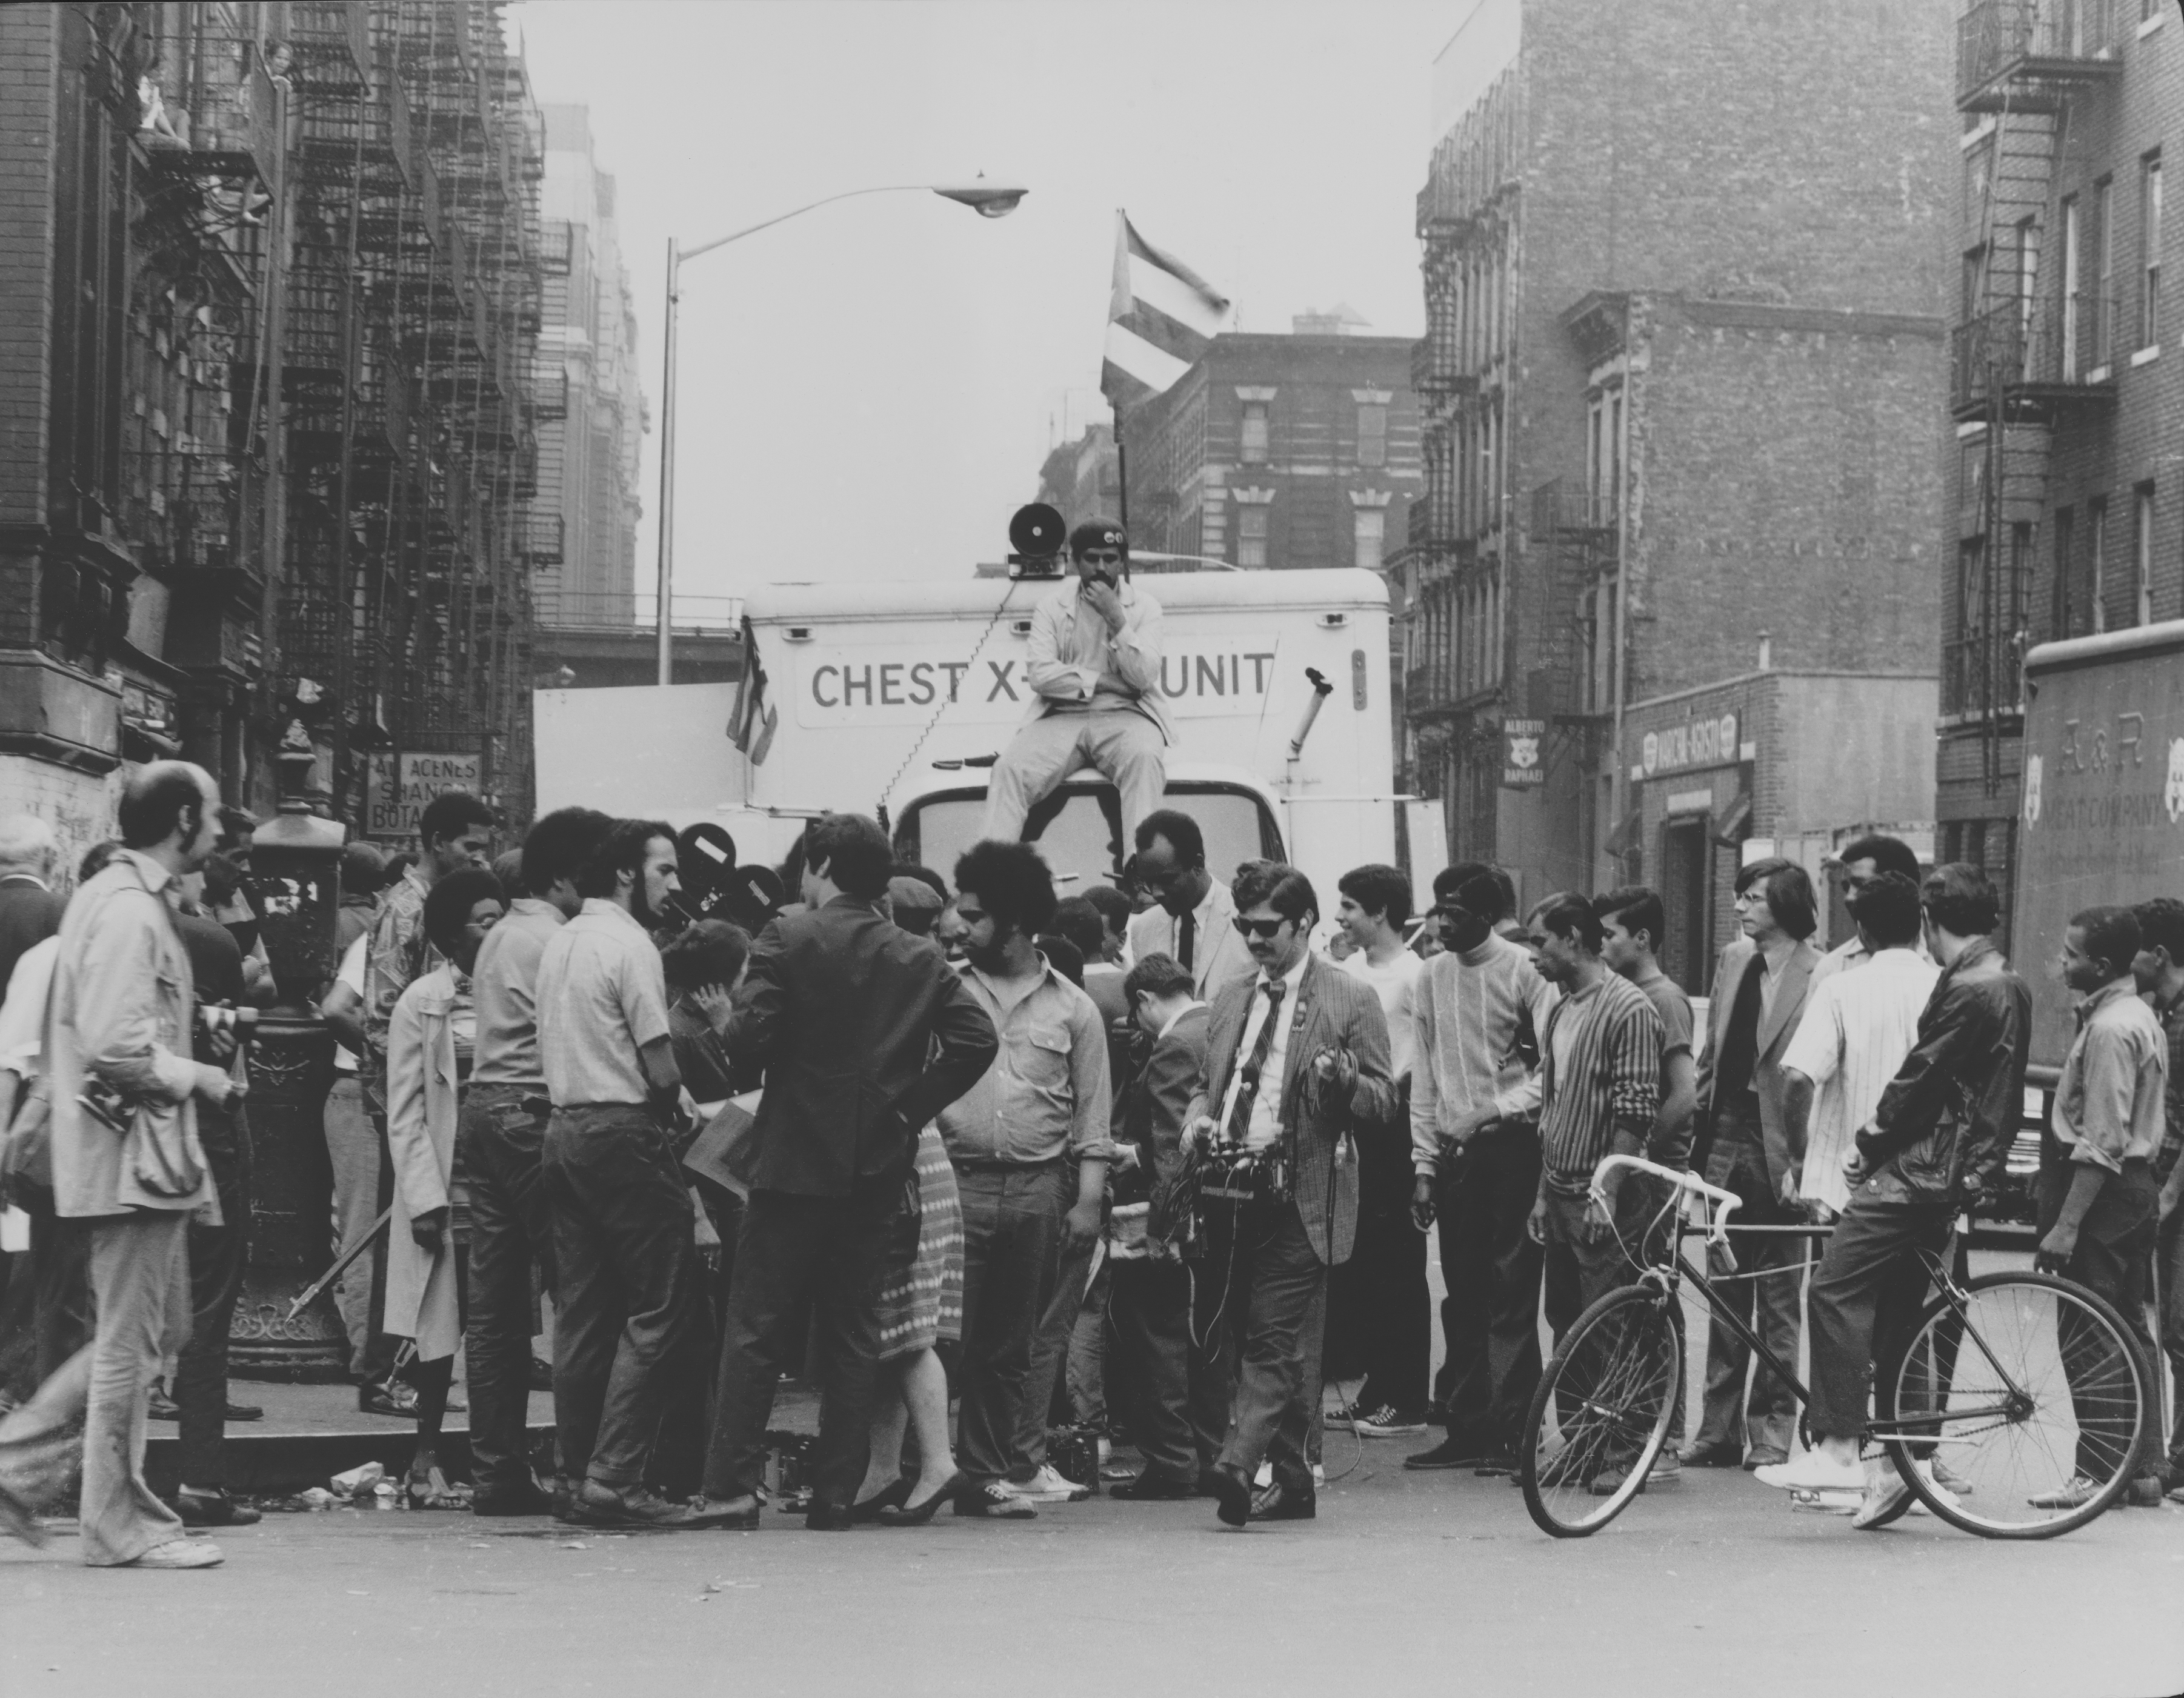 A crowd gathered in front of an X-ray unit truck. A man sits on the truck, staring at the camera.